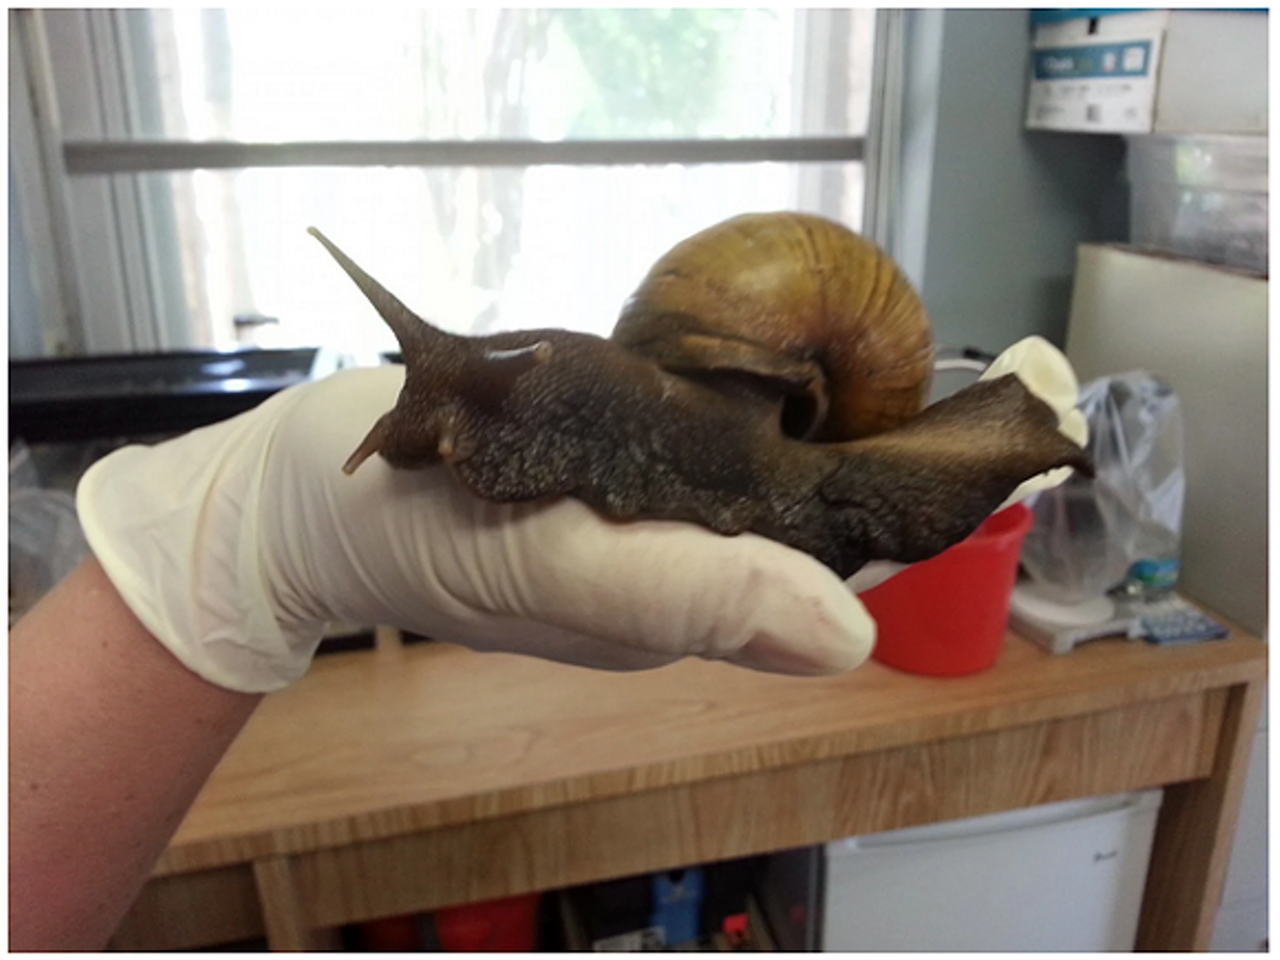 You could get meningitis from a giant snail.
Photo via Orlando Weekly